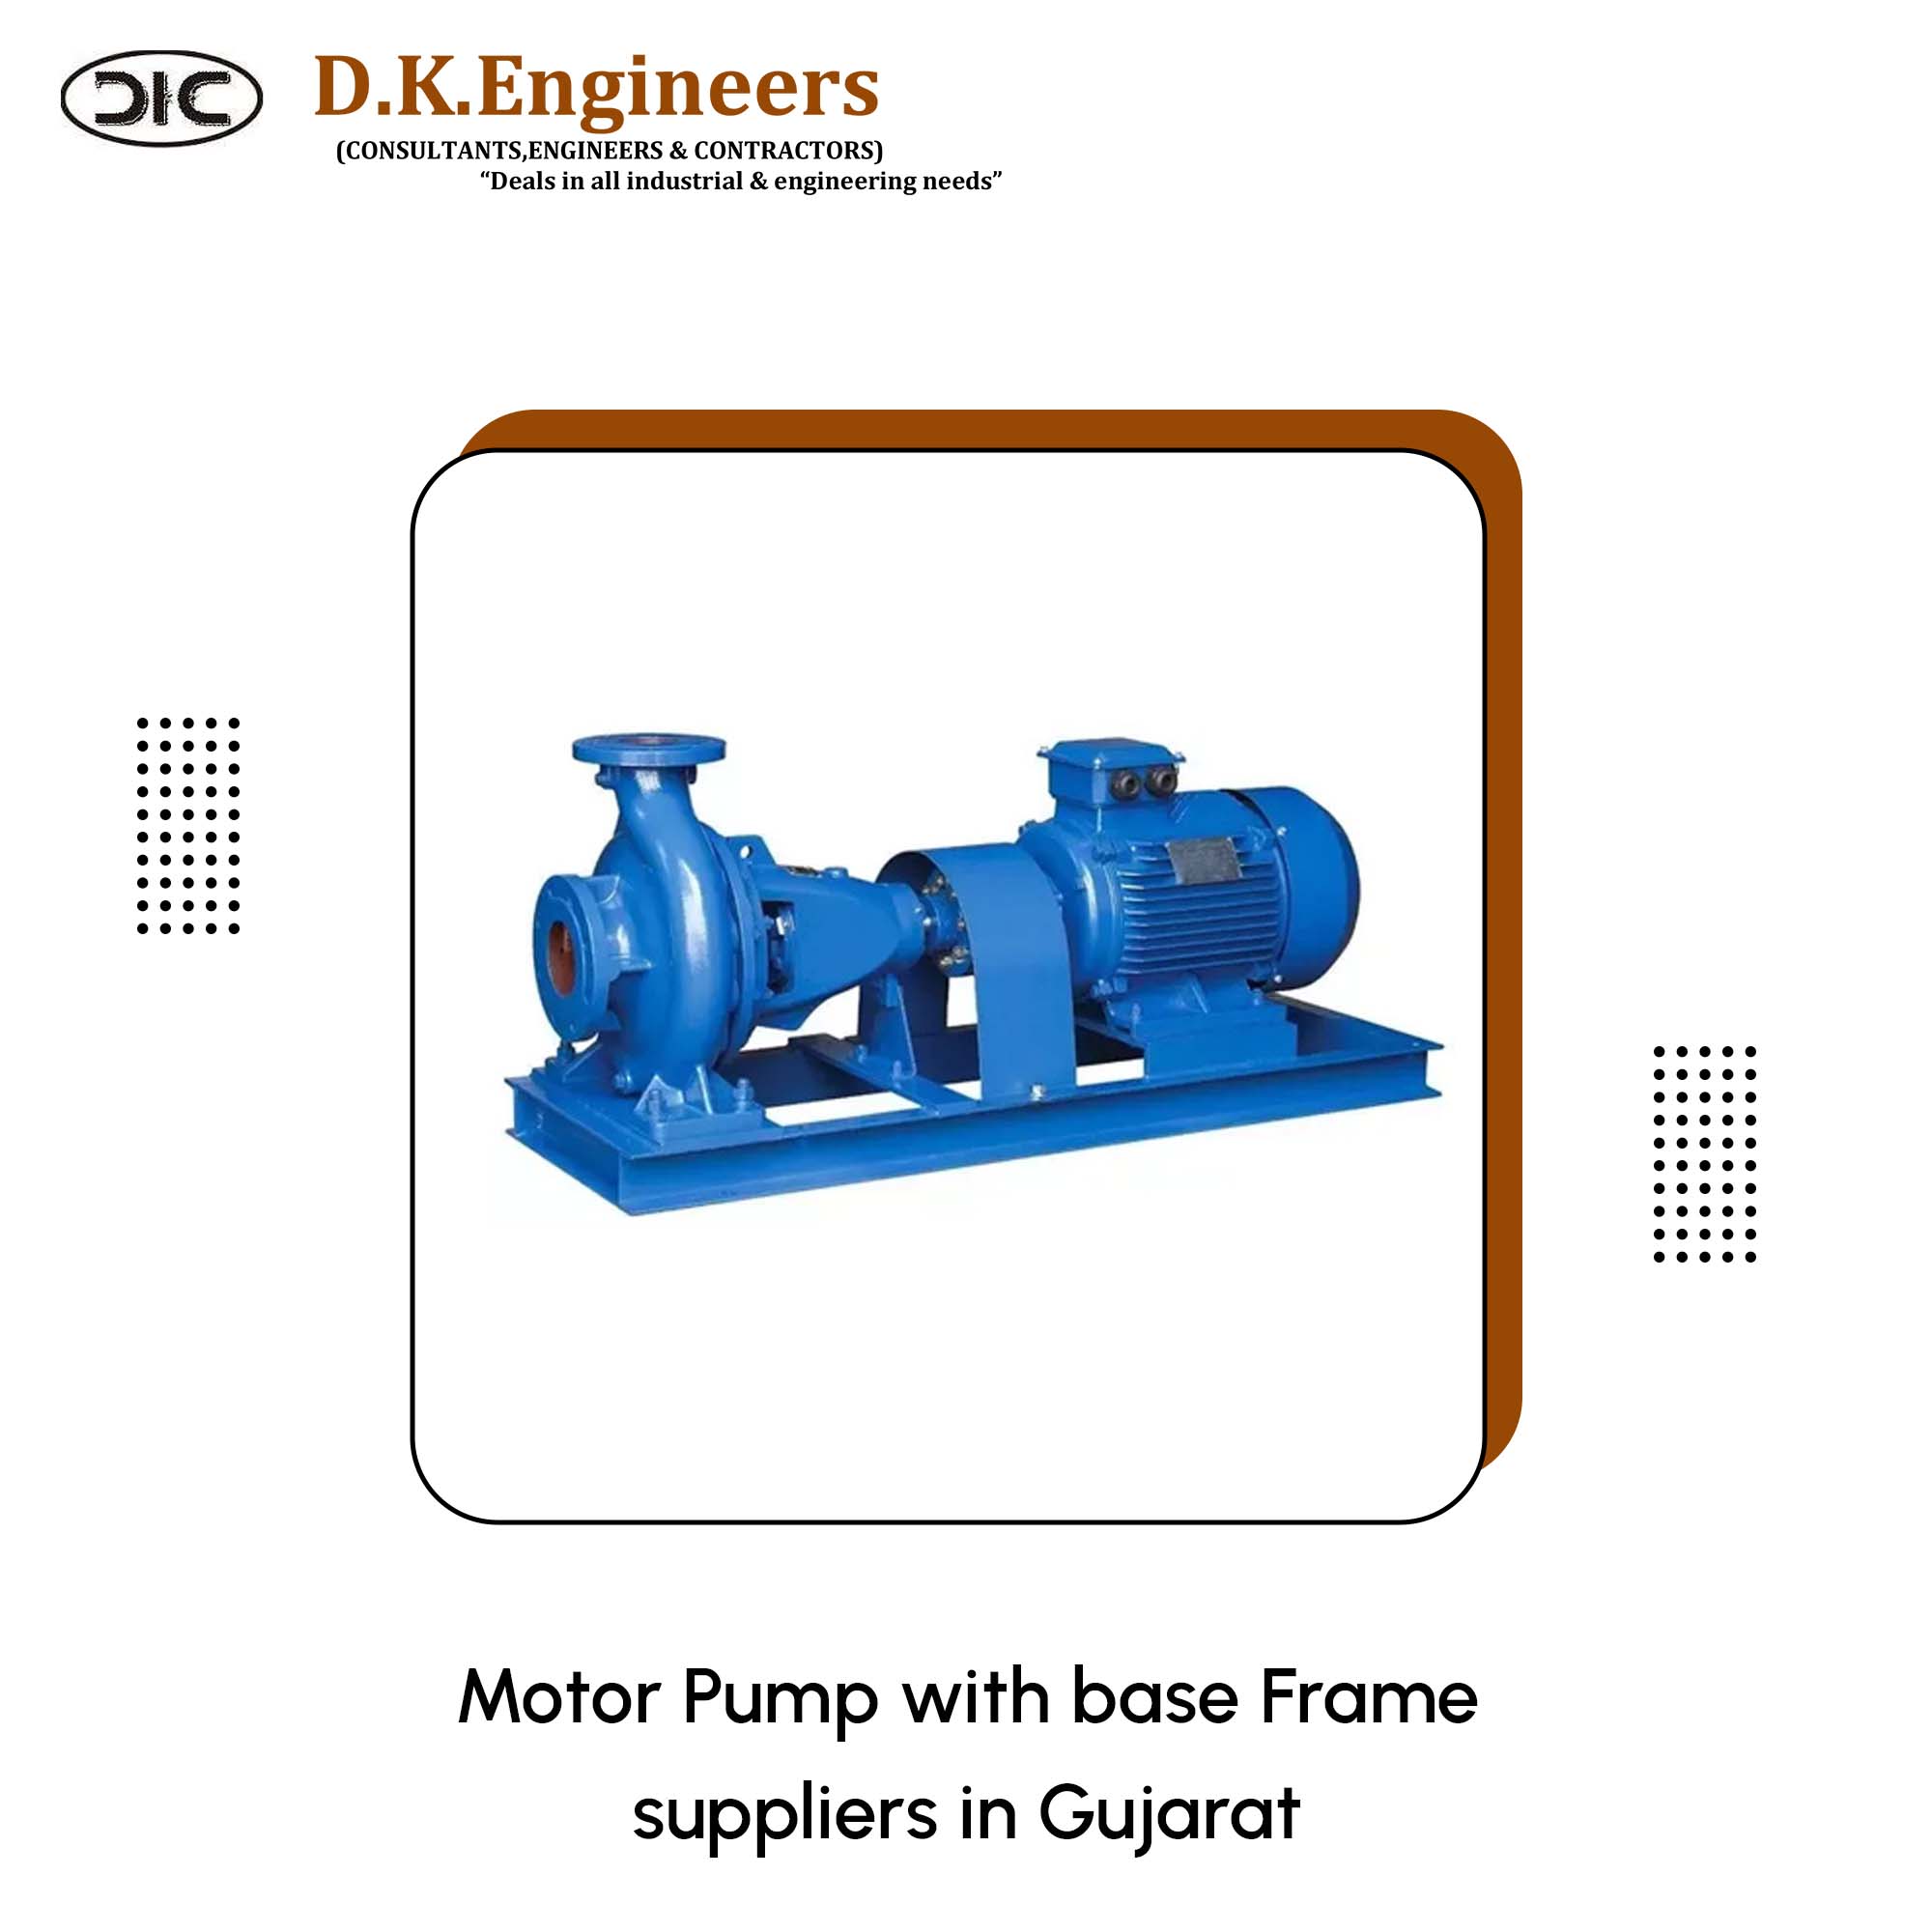 Motor Pump with base Frame suppliers in Gujarat